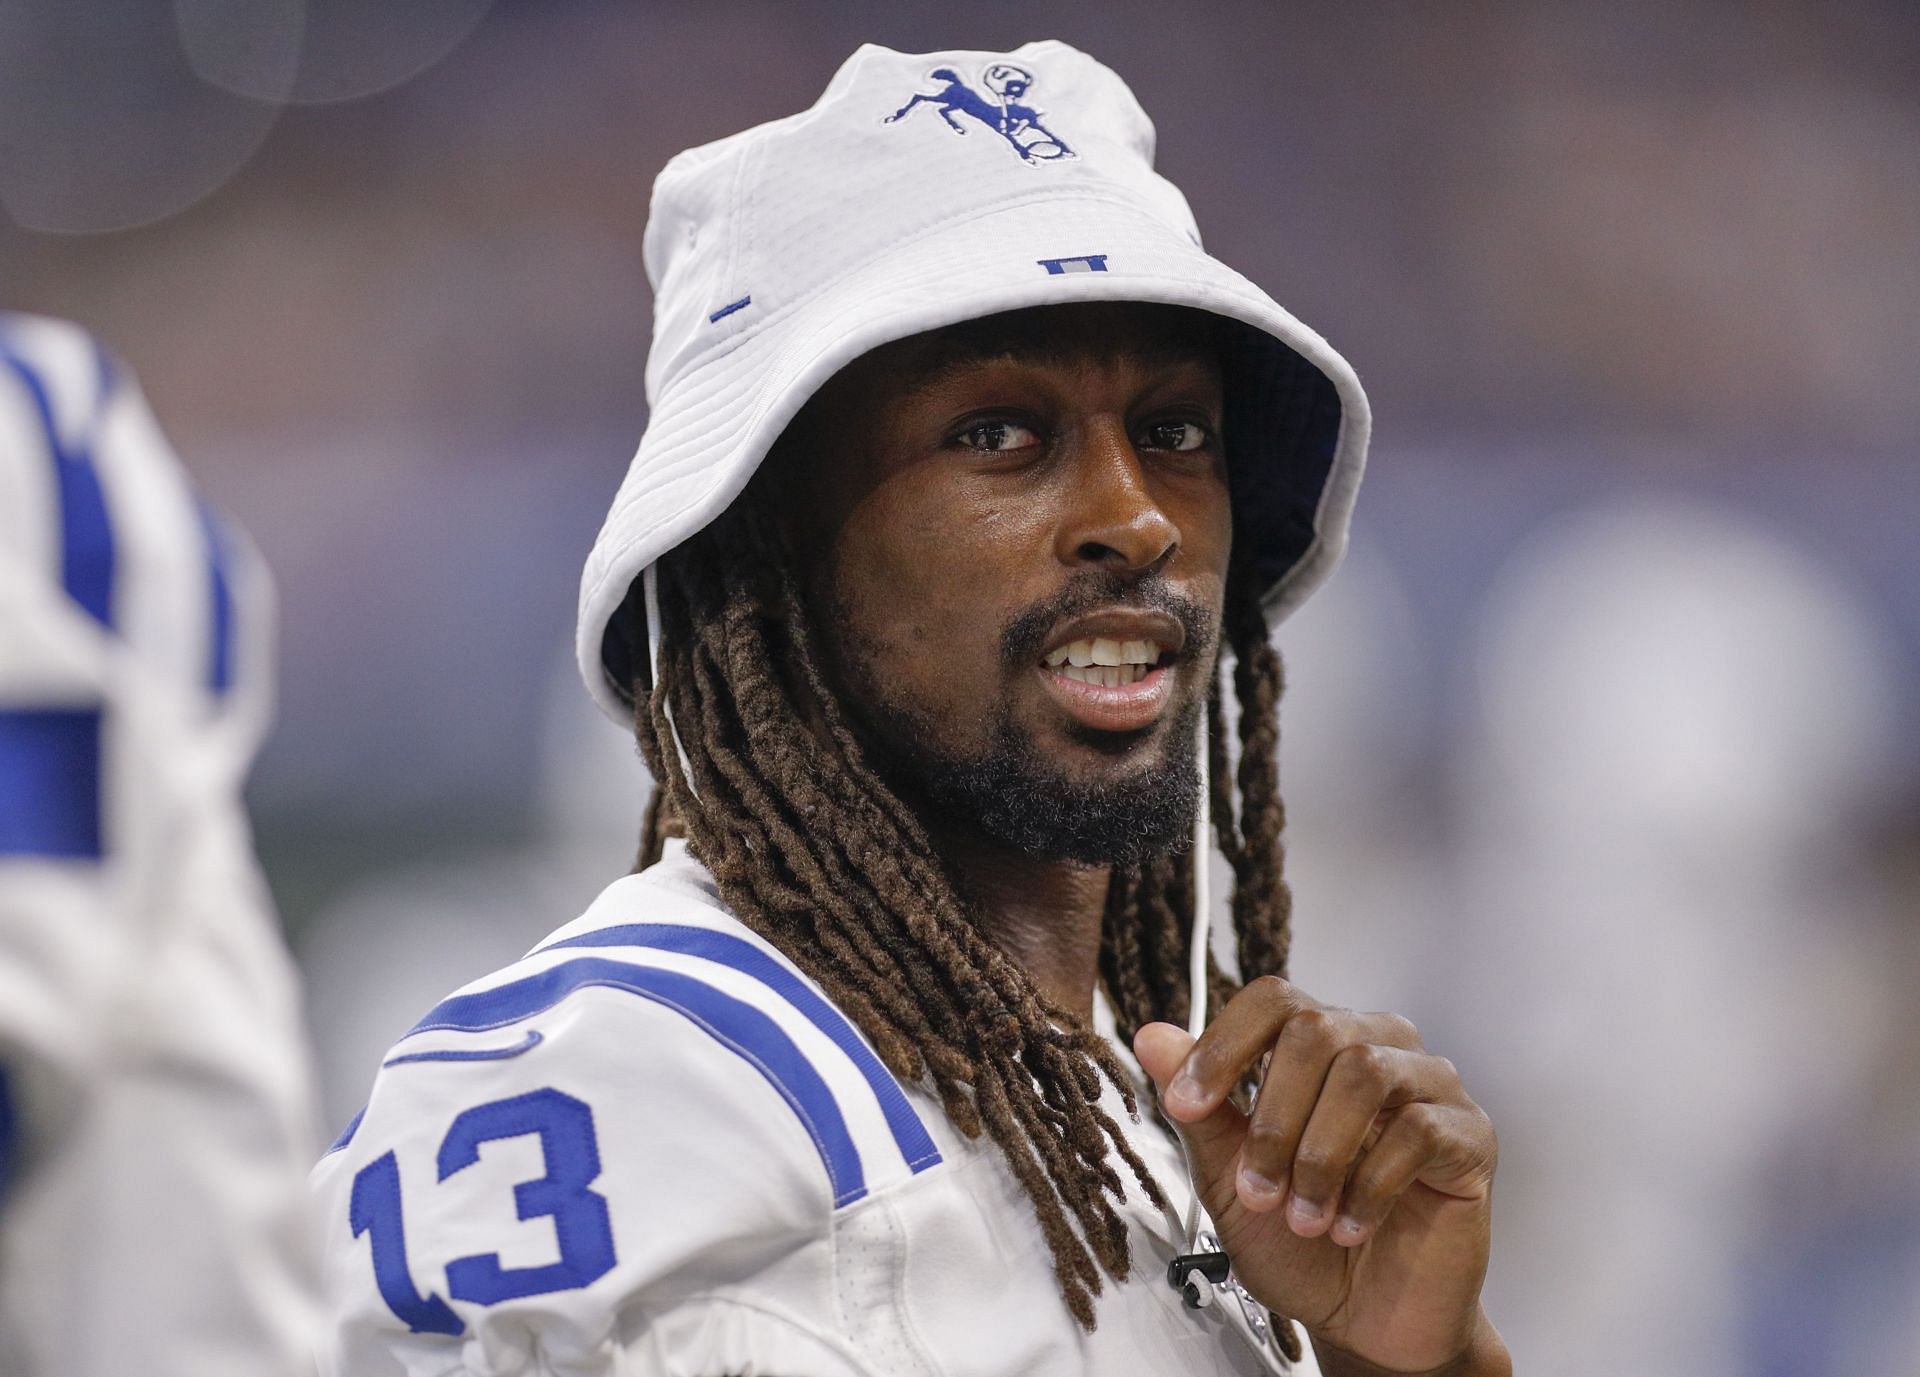 Former Indianapolis Colts WR T.Y. Hilton